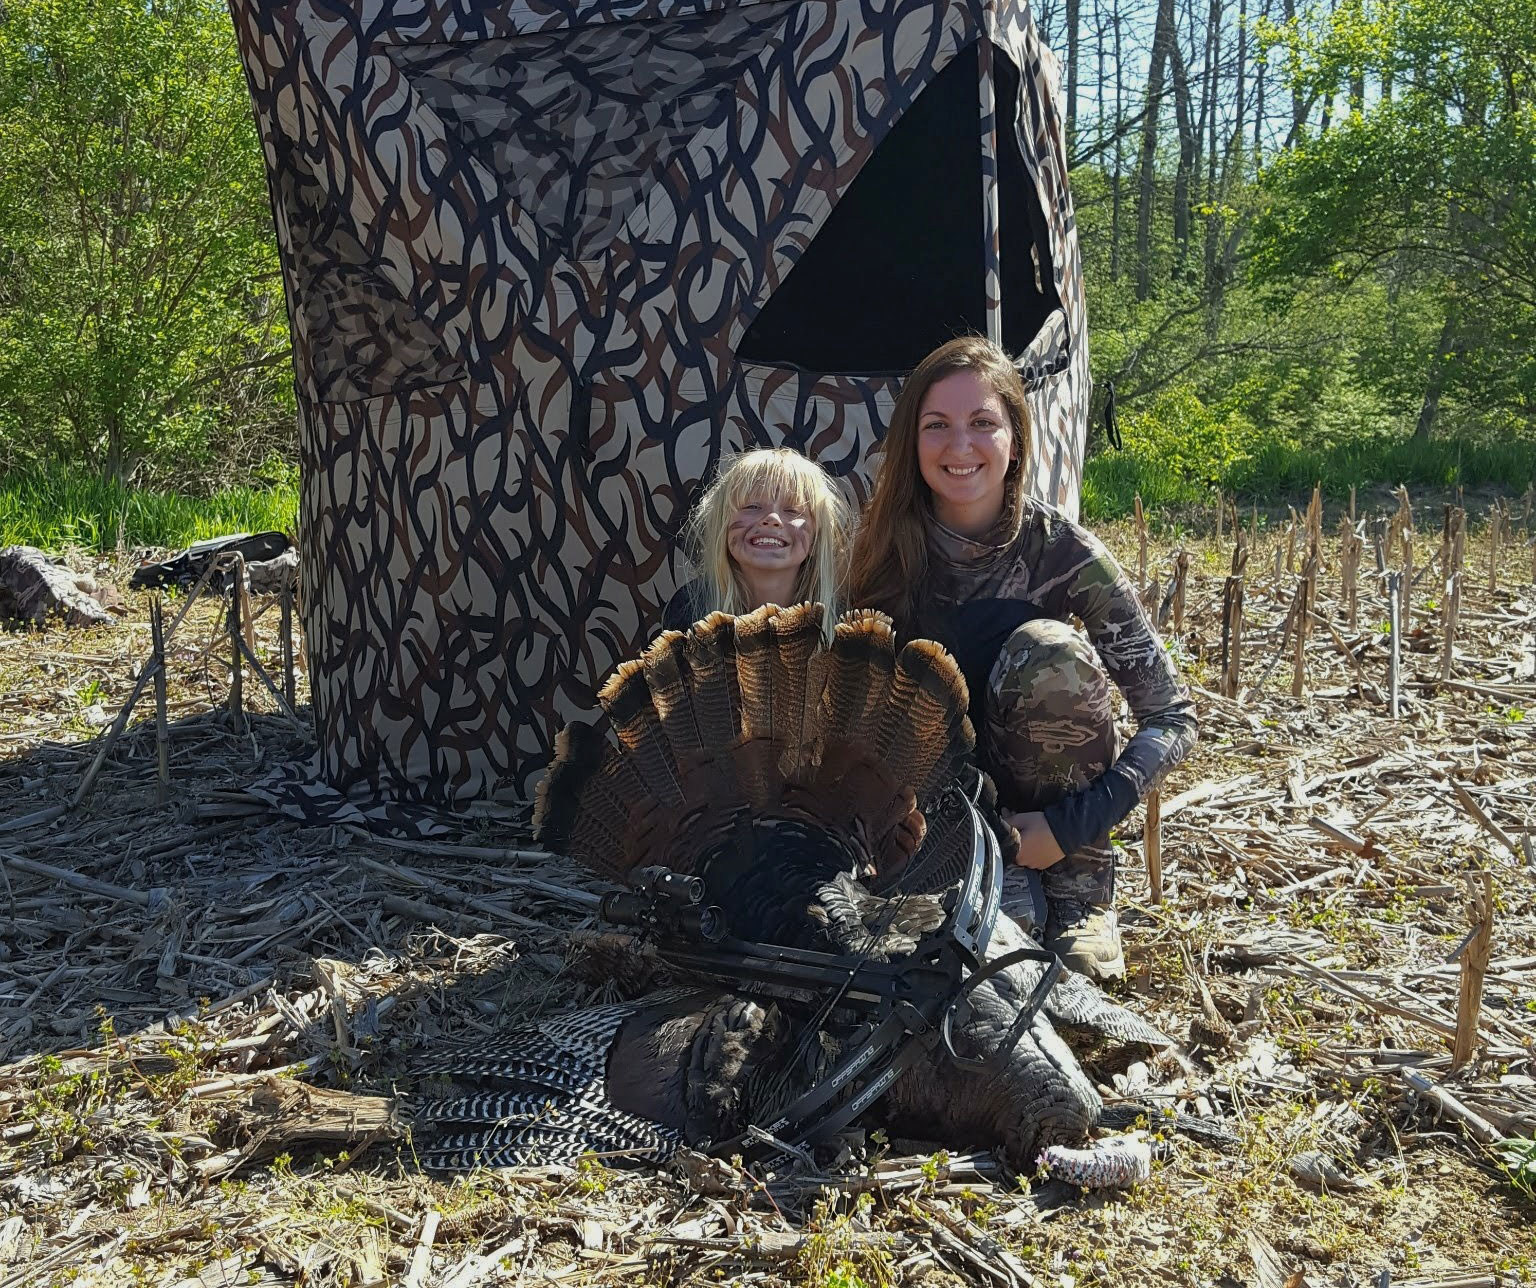 Opinion from a Trad Bow Hunter: Crossbows are Ideal for Getting Little Kids into Hunting